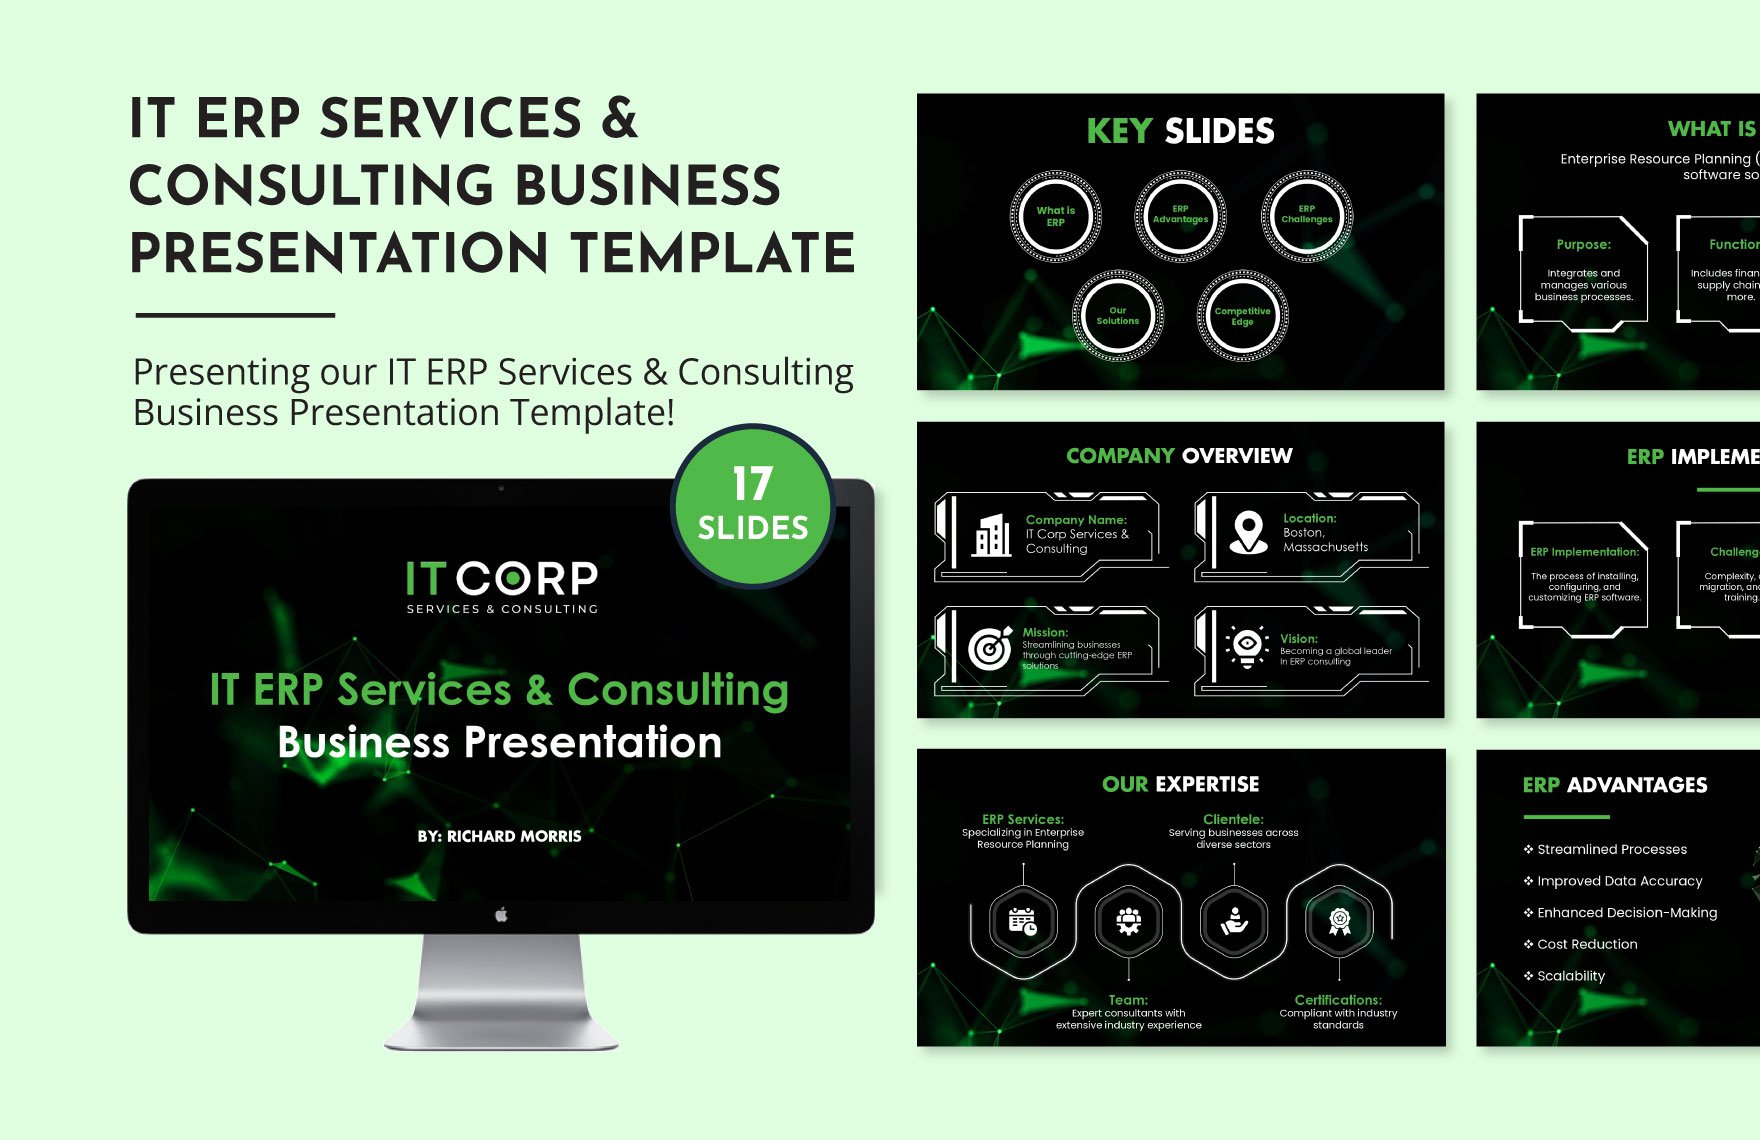 IT ERP Services & Consulting Business Presentation Template